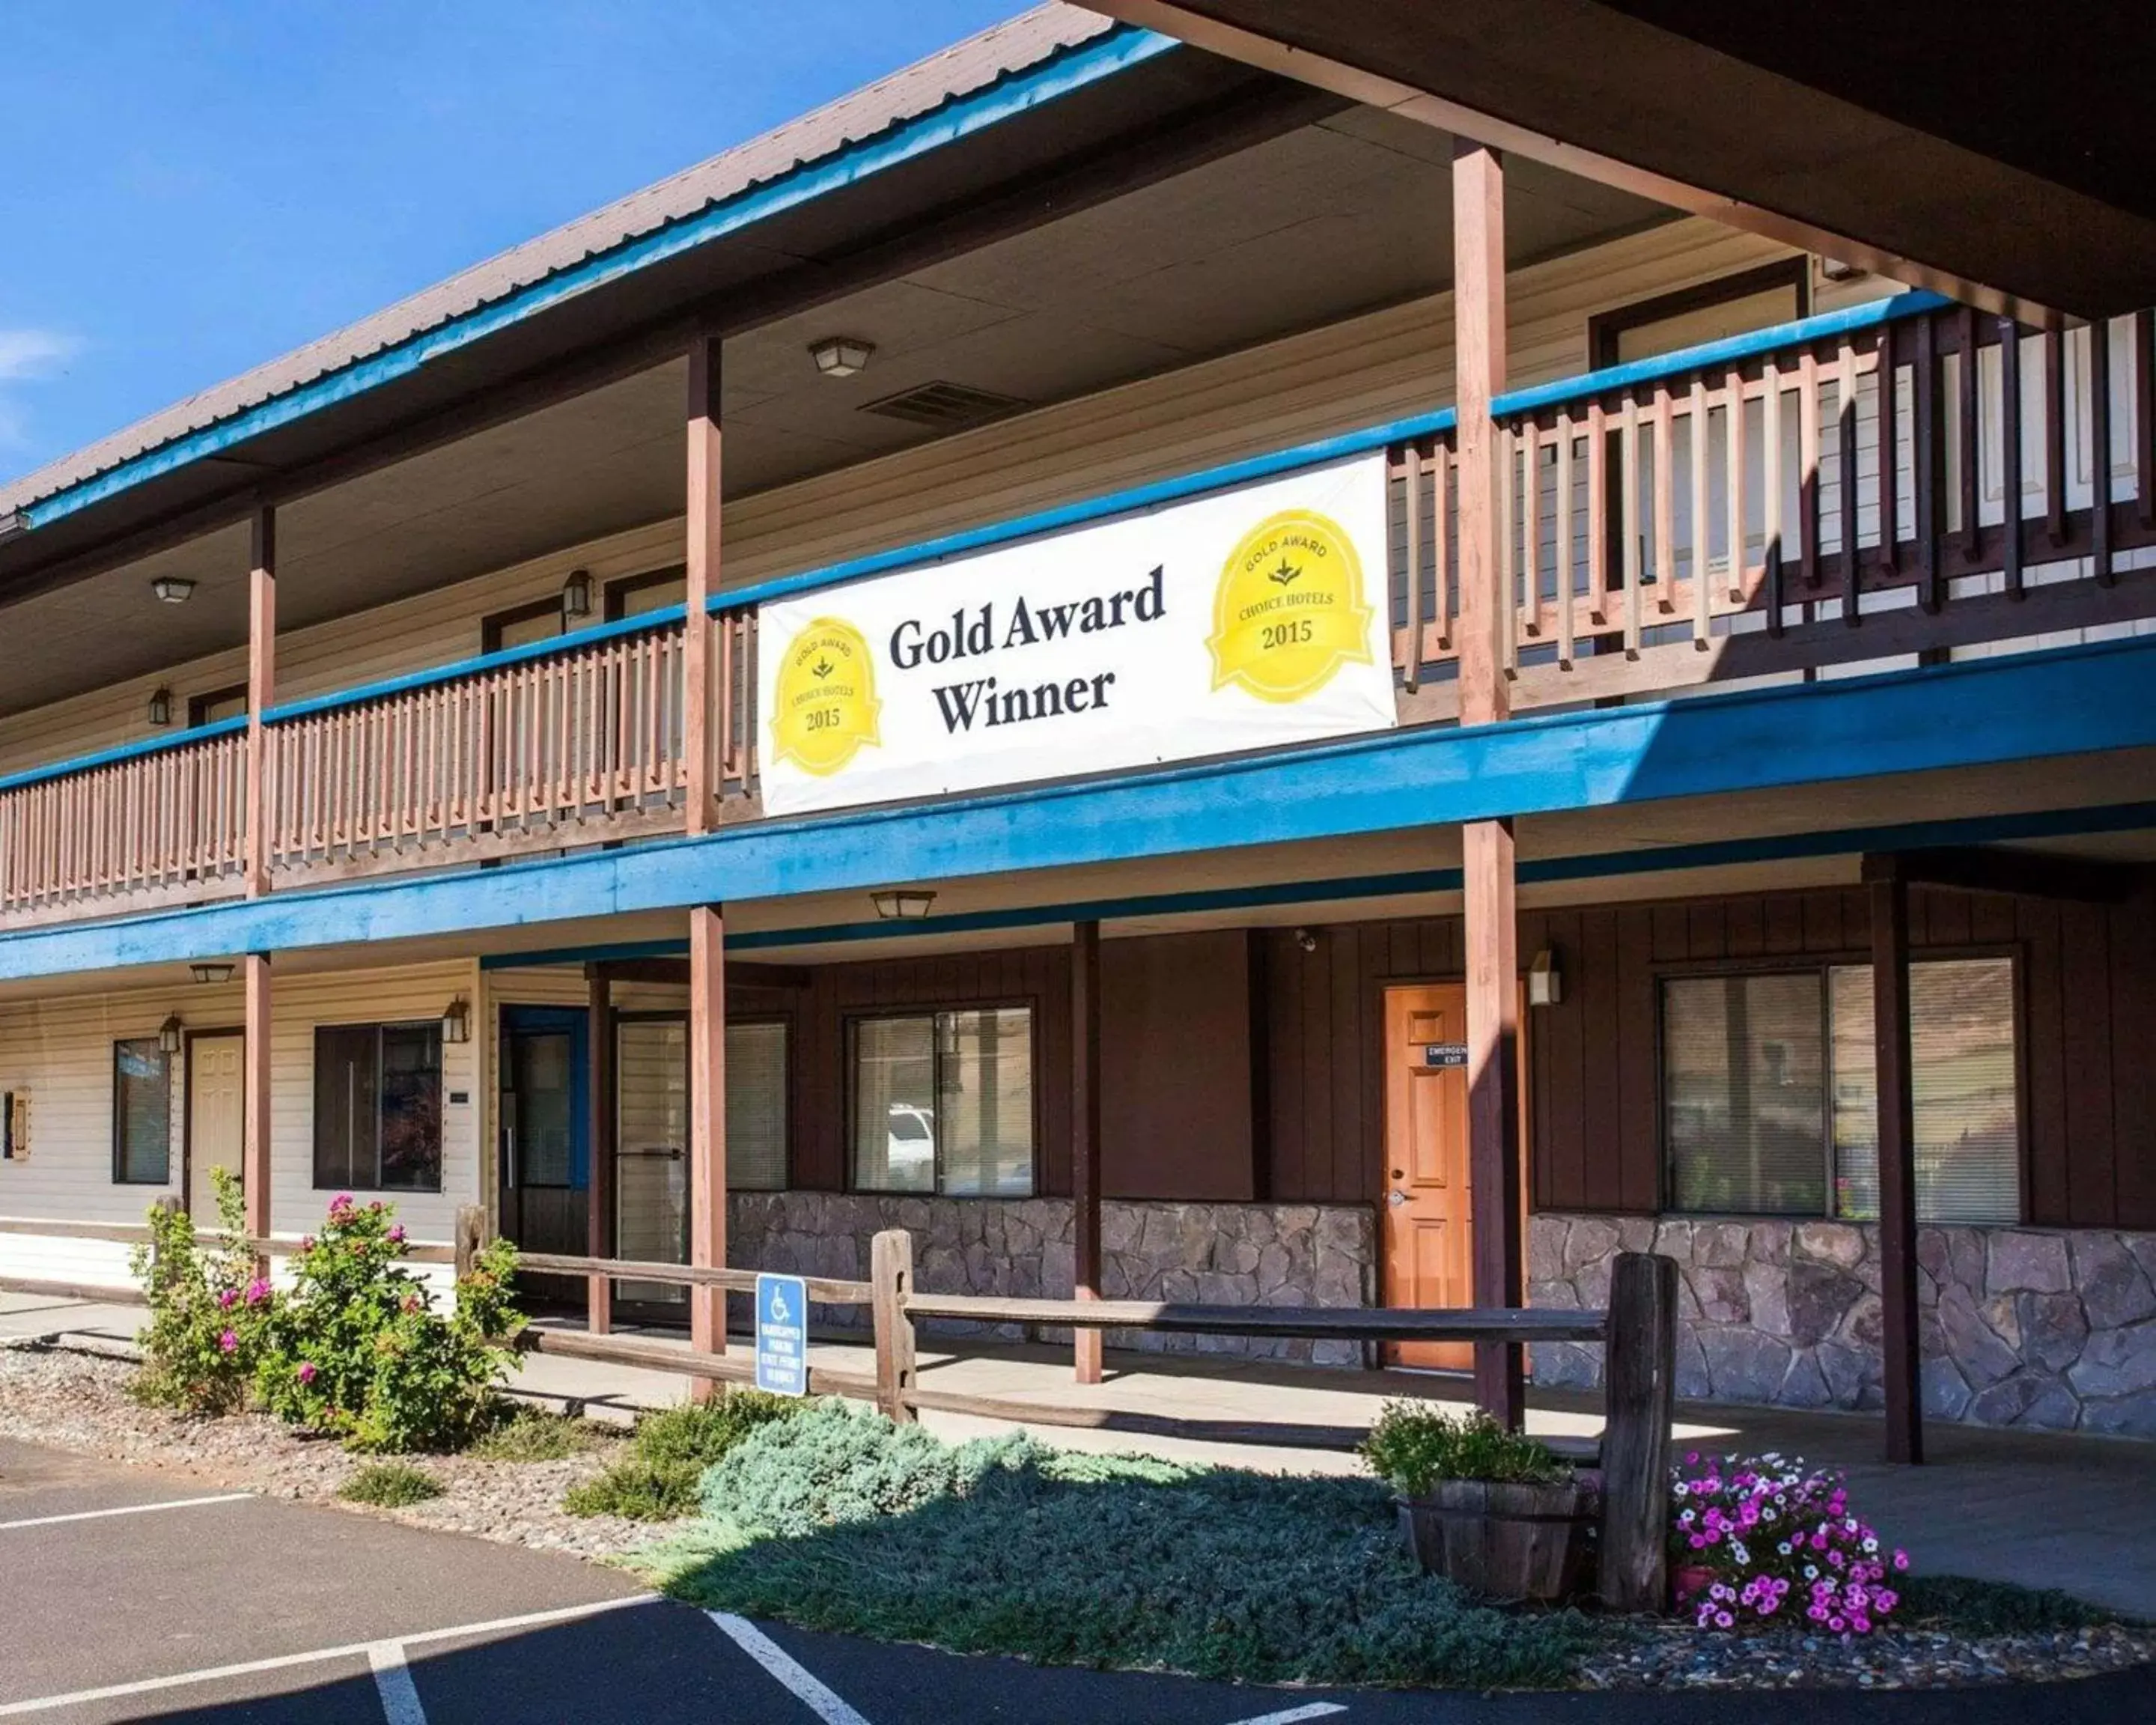 Property Building in Quality Inn & Suites Goldendale